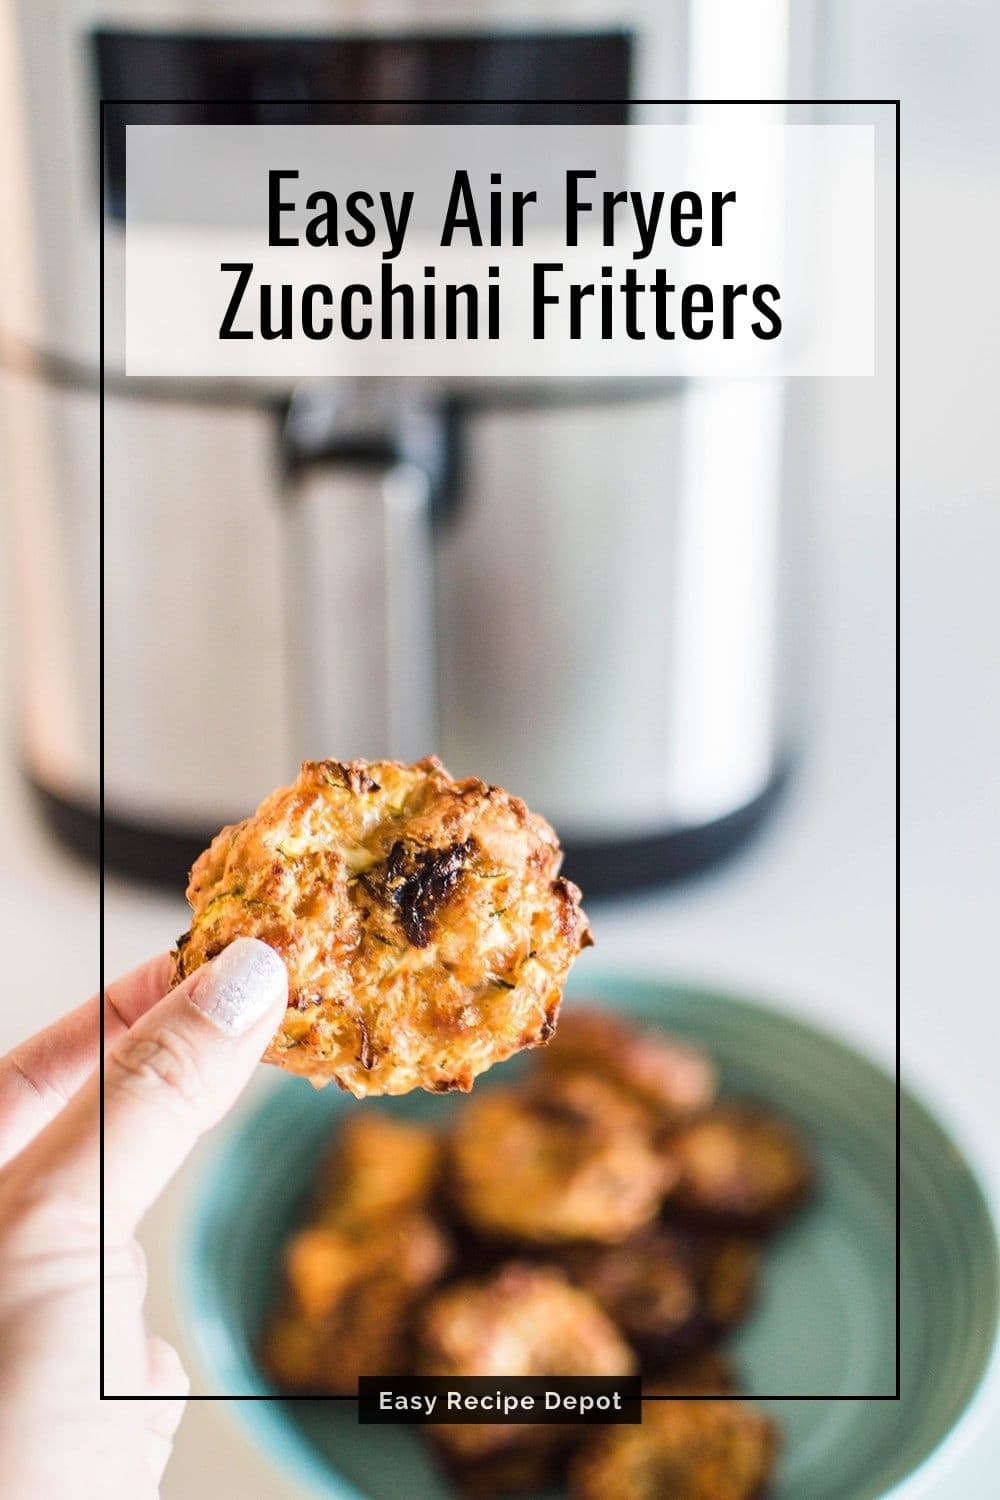 Easy Air Fryer Zucchini Fritters.